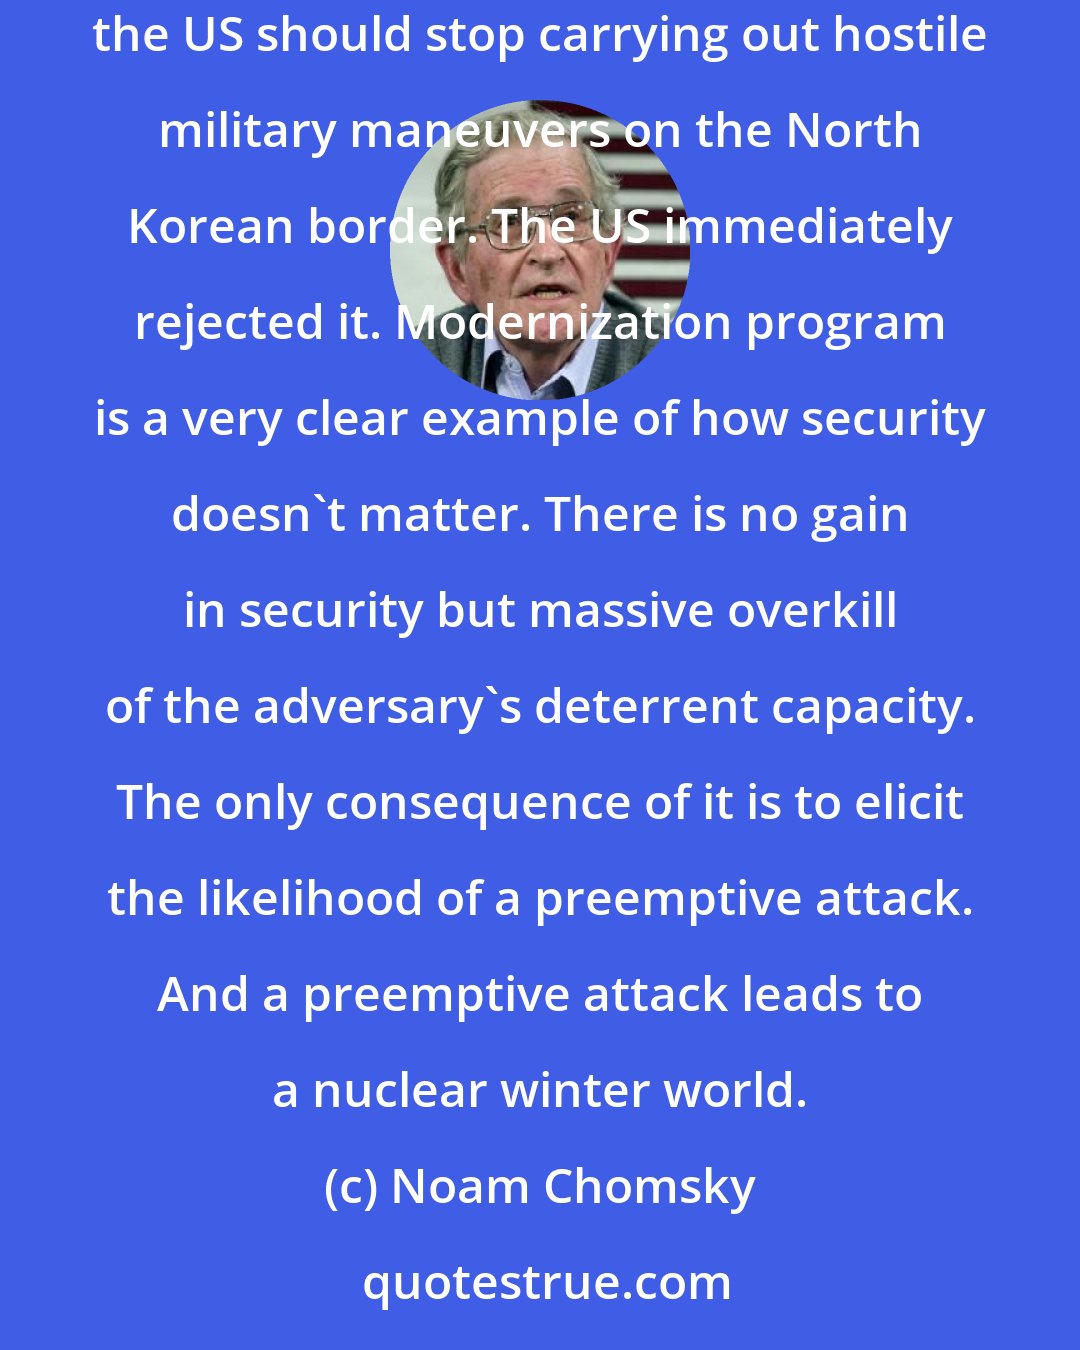 Noam Chomsky: North Korea and China have proposed what sounds like a pretty sensible option that North Korea should end its development of nuclear weapons, the US should stop carrying out hostile military maneuvers on the North Korean border. The US immediately rejected it. Modernization program is a very clear example of how security doesn't matter. There is no gain in security but massive overkill of the adversary's deterrent capacity. The only consequence of it is to elicit the likelihood of a preemptive attack. And a preemptive attack leads to a nuclear winter world.